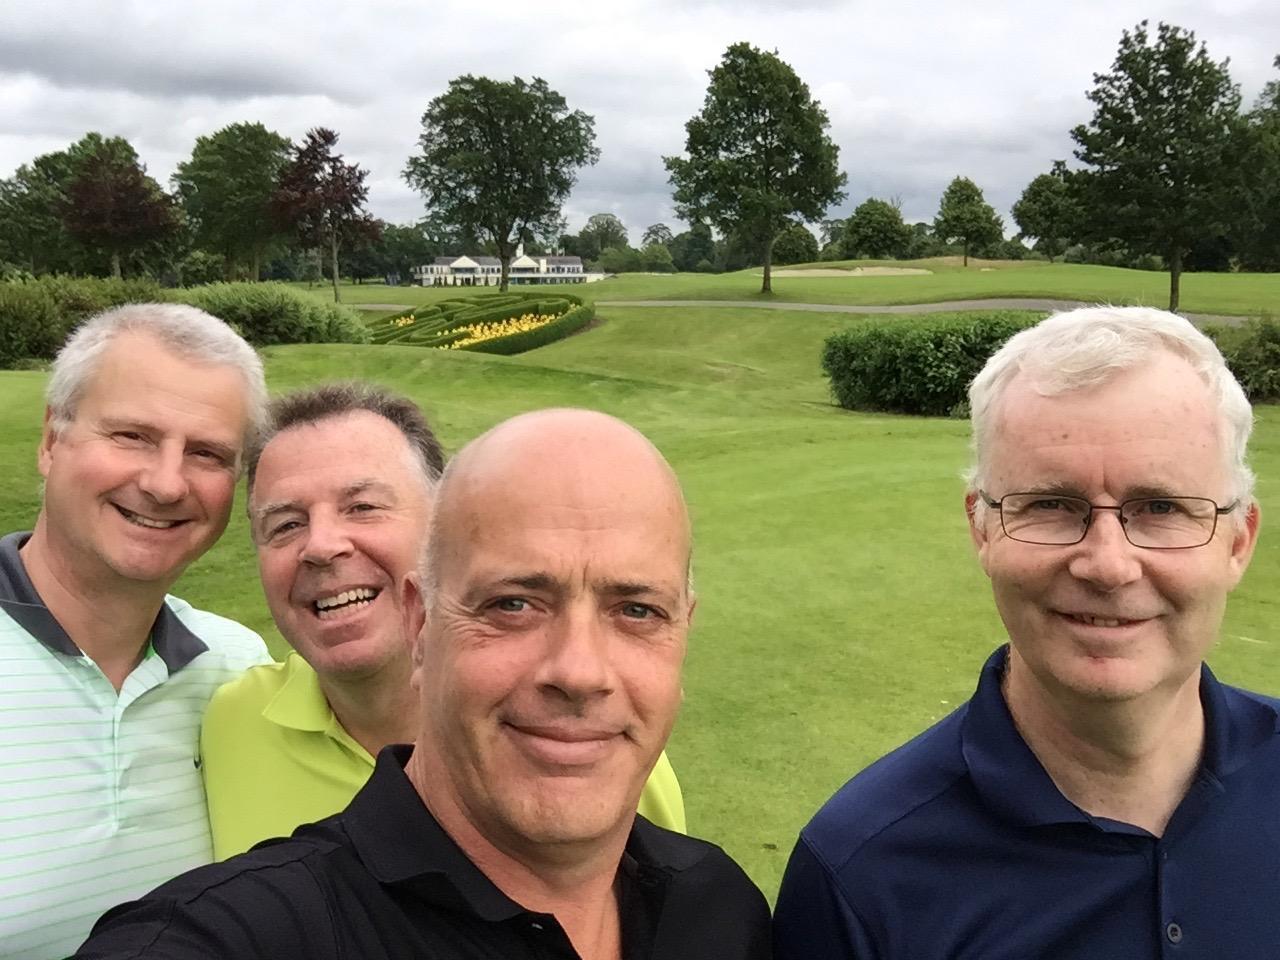 Eoin (second from right) enjoying golf with the Jubilee group (their regular fourball match).